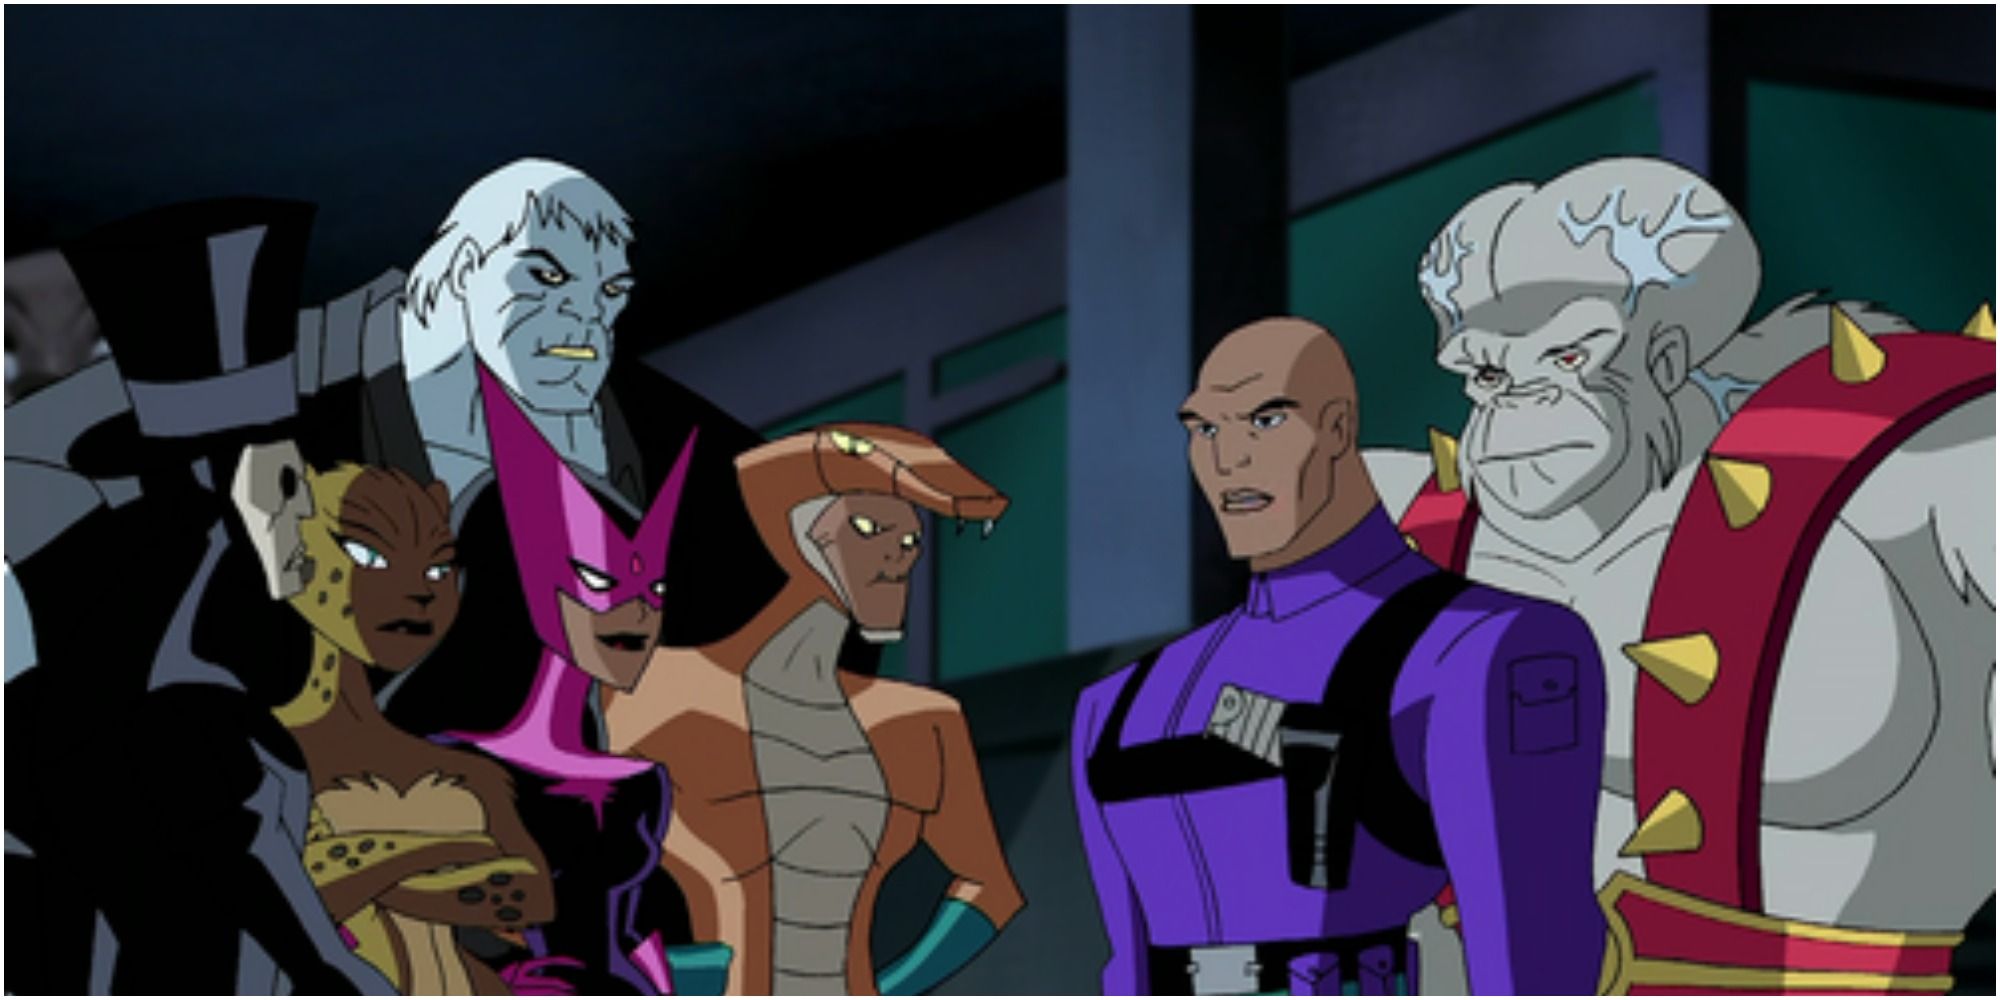 Justce-League-Injustice-For-All-Episode-Lex-Luthor-Villains